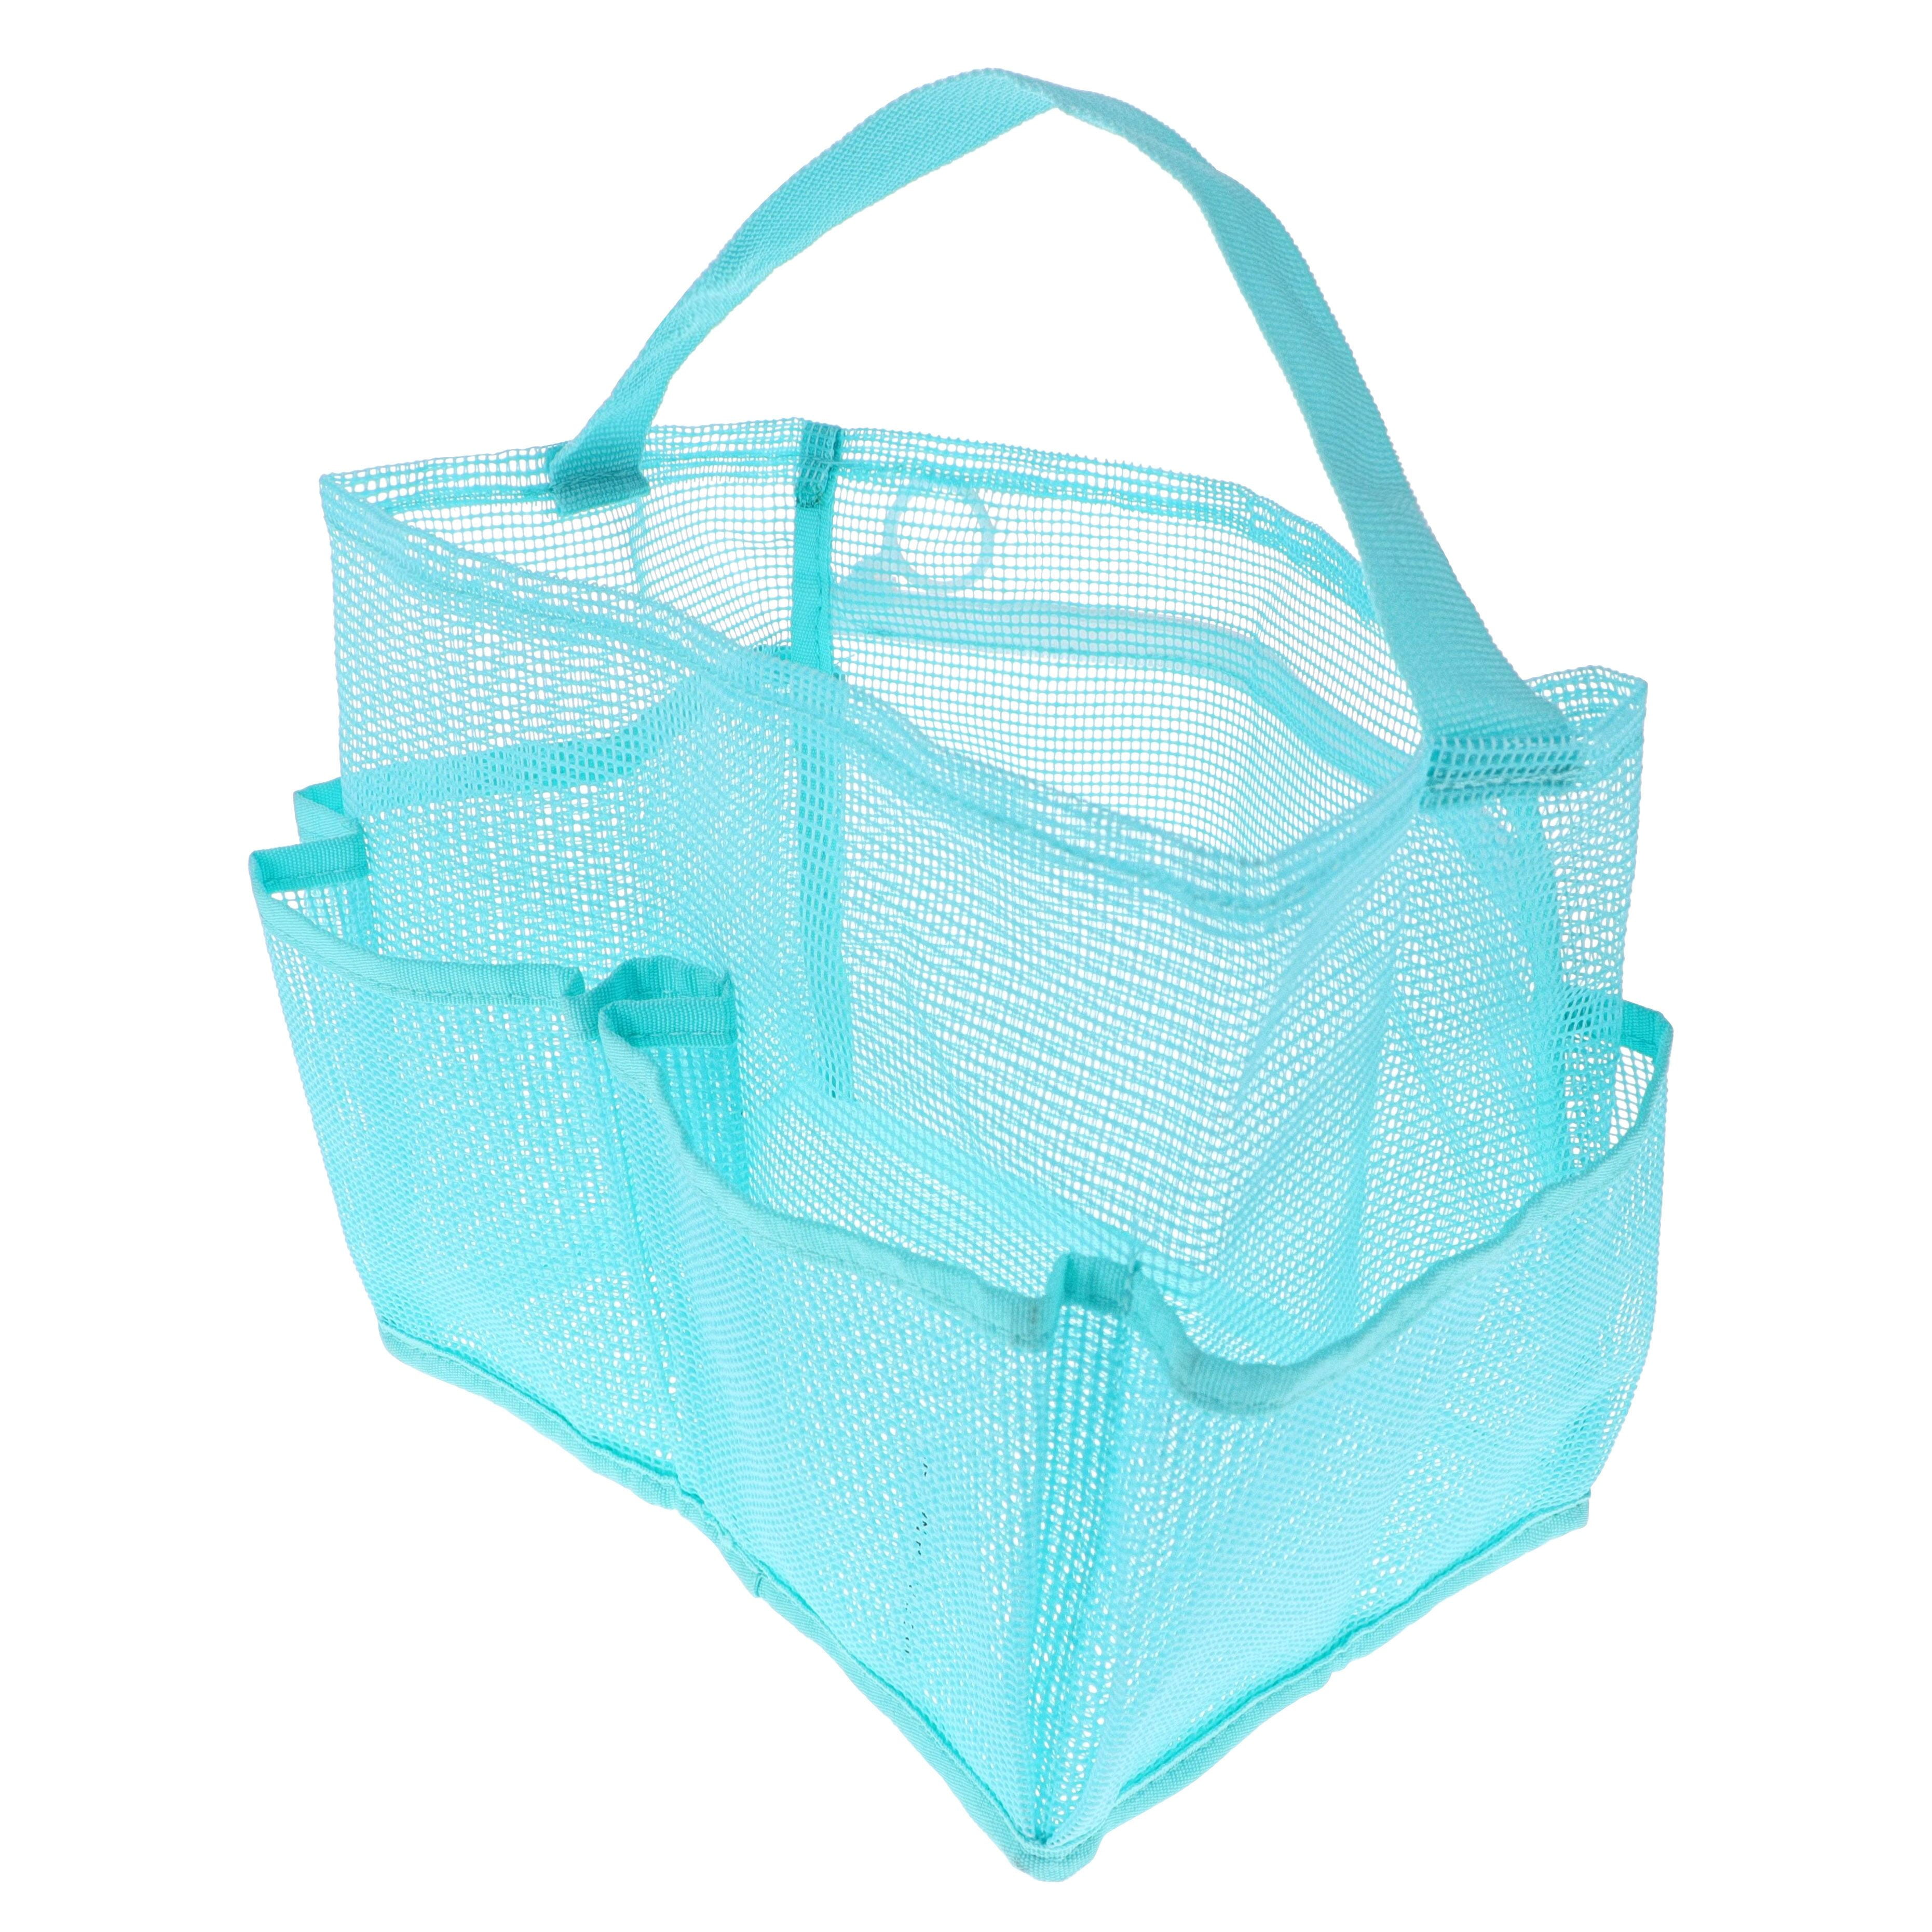 Mainstays 5 Pocket Teal Mesh Shower Tote with Zipper Water-Resistant ...